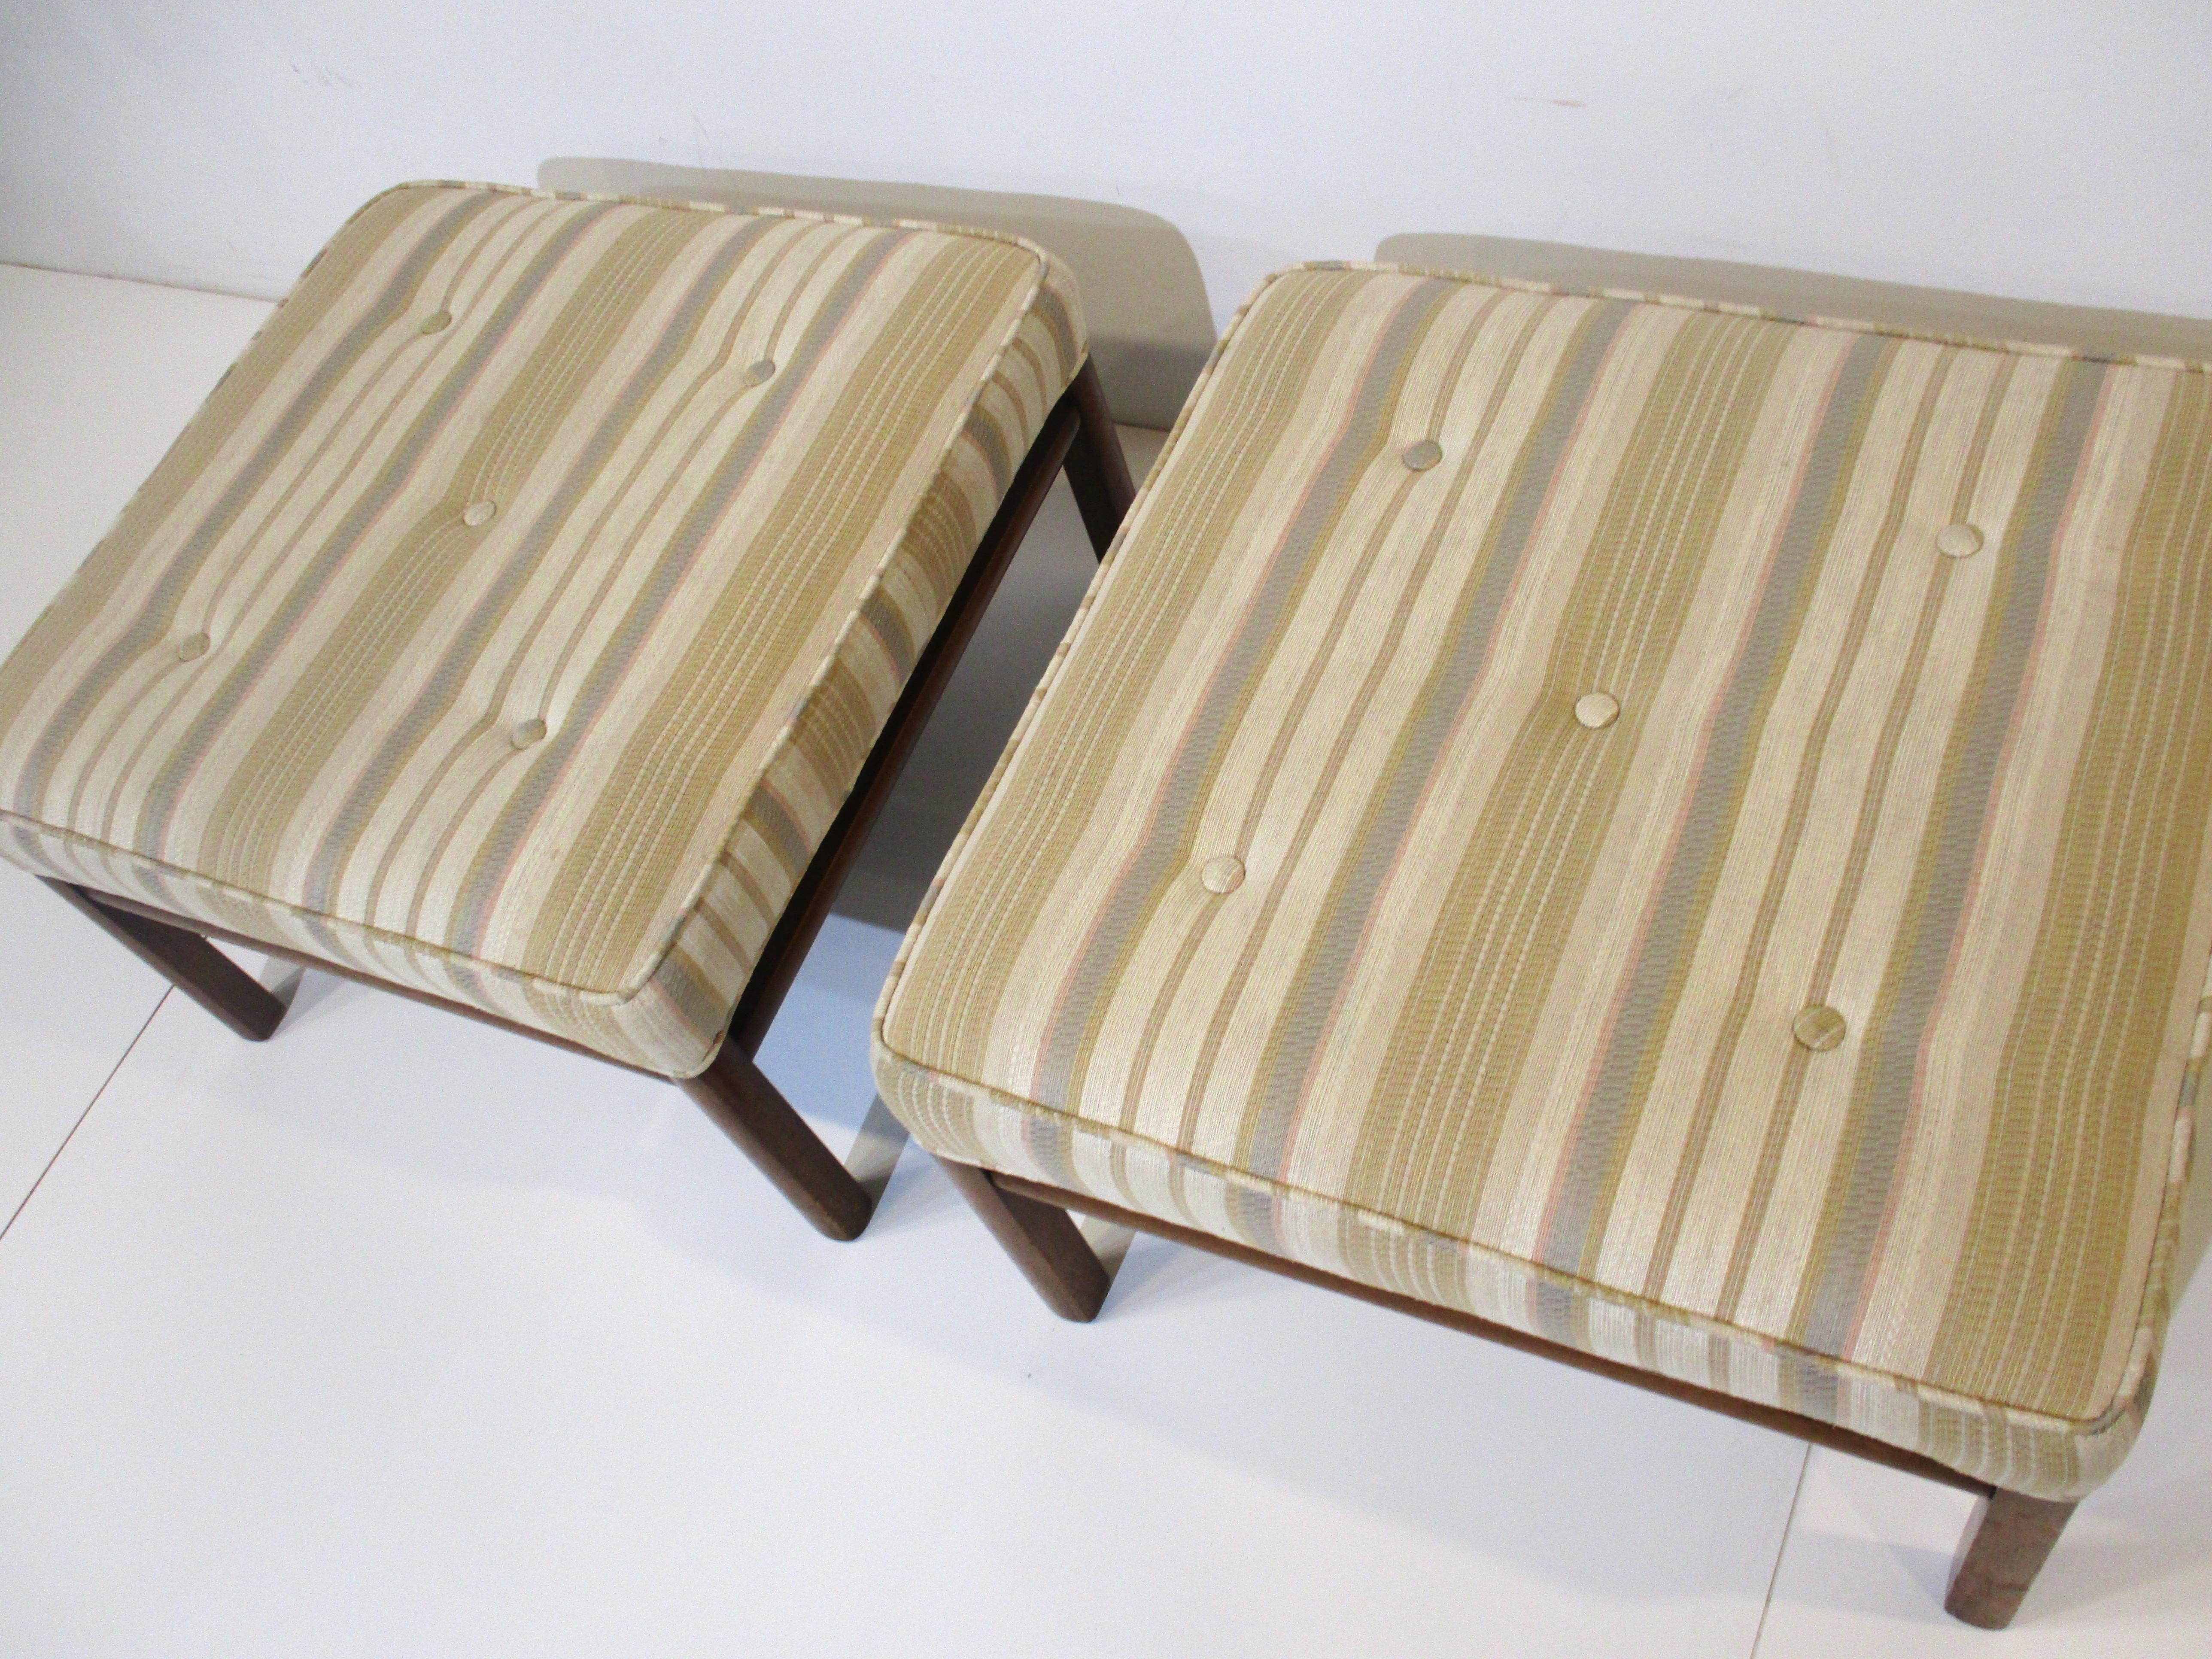 Upholstery Upholstered Ottomans / Stools in the Style of Harvery Probber